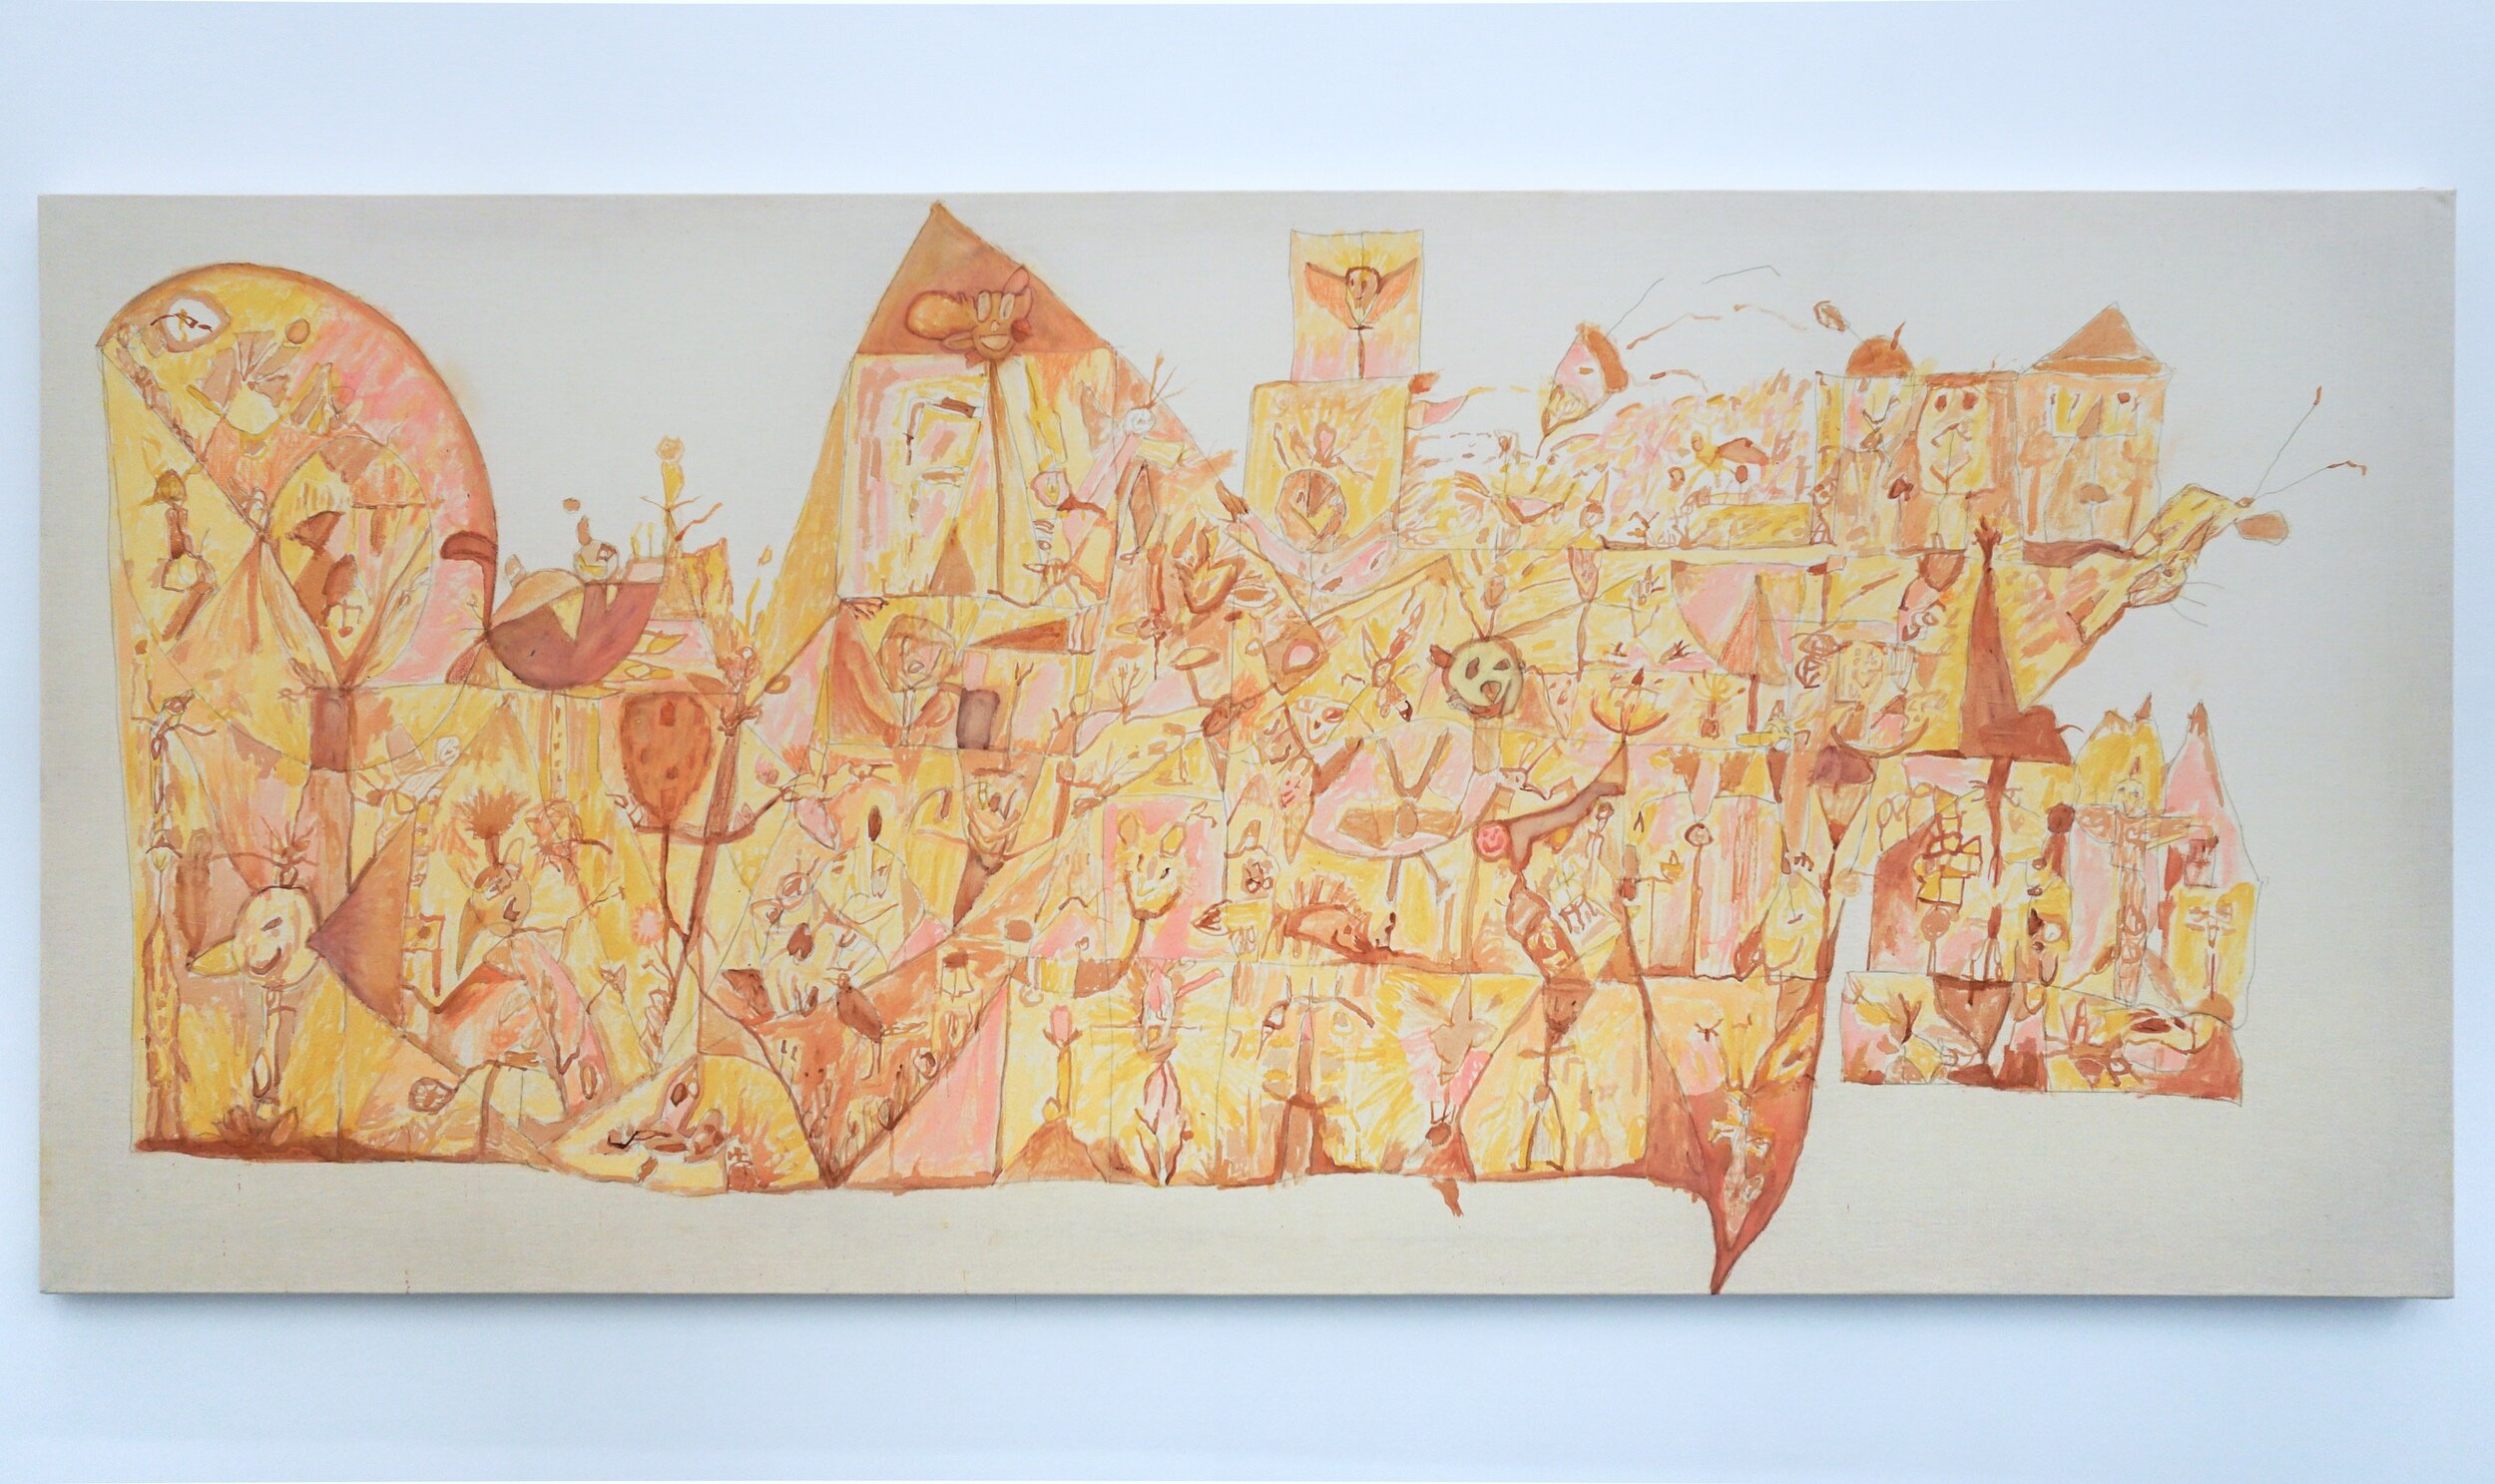  Ross Simonini   The Unders , 2020  Watercolor, tempera, wax crayon, and graphite on muslin  95 x 44.5 inches 